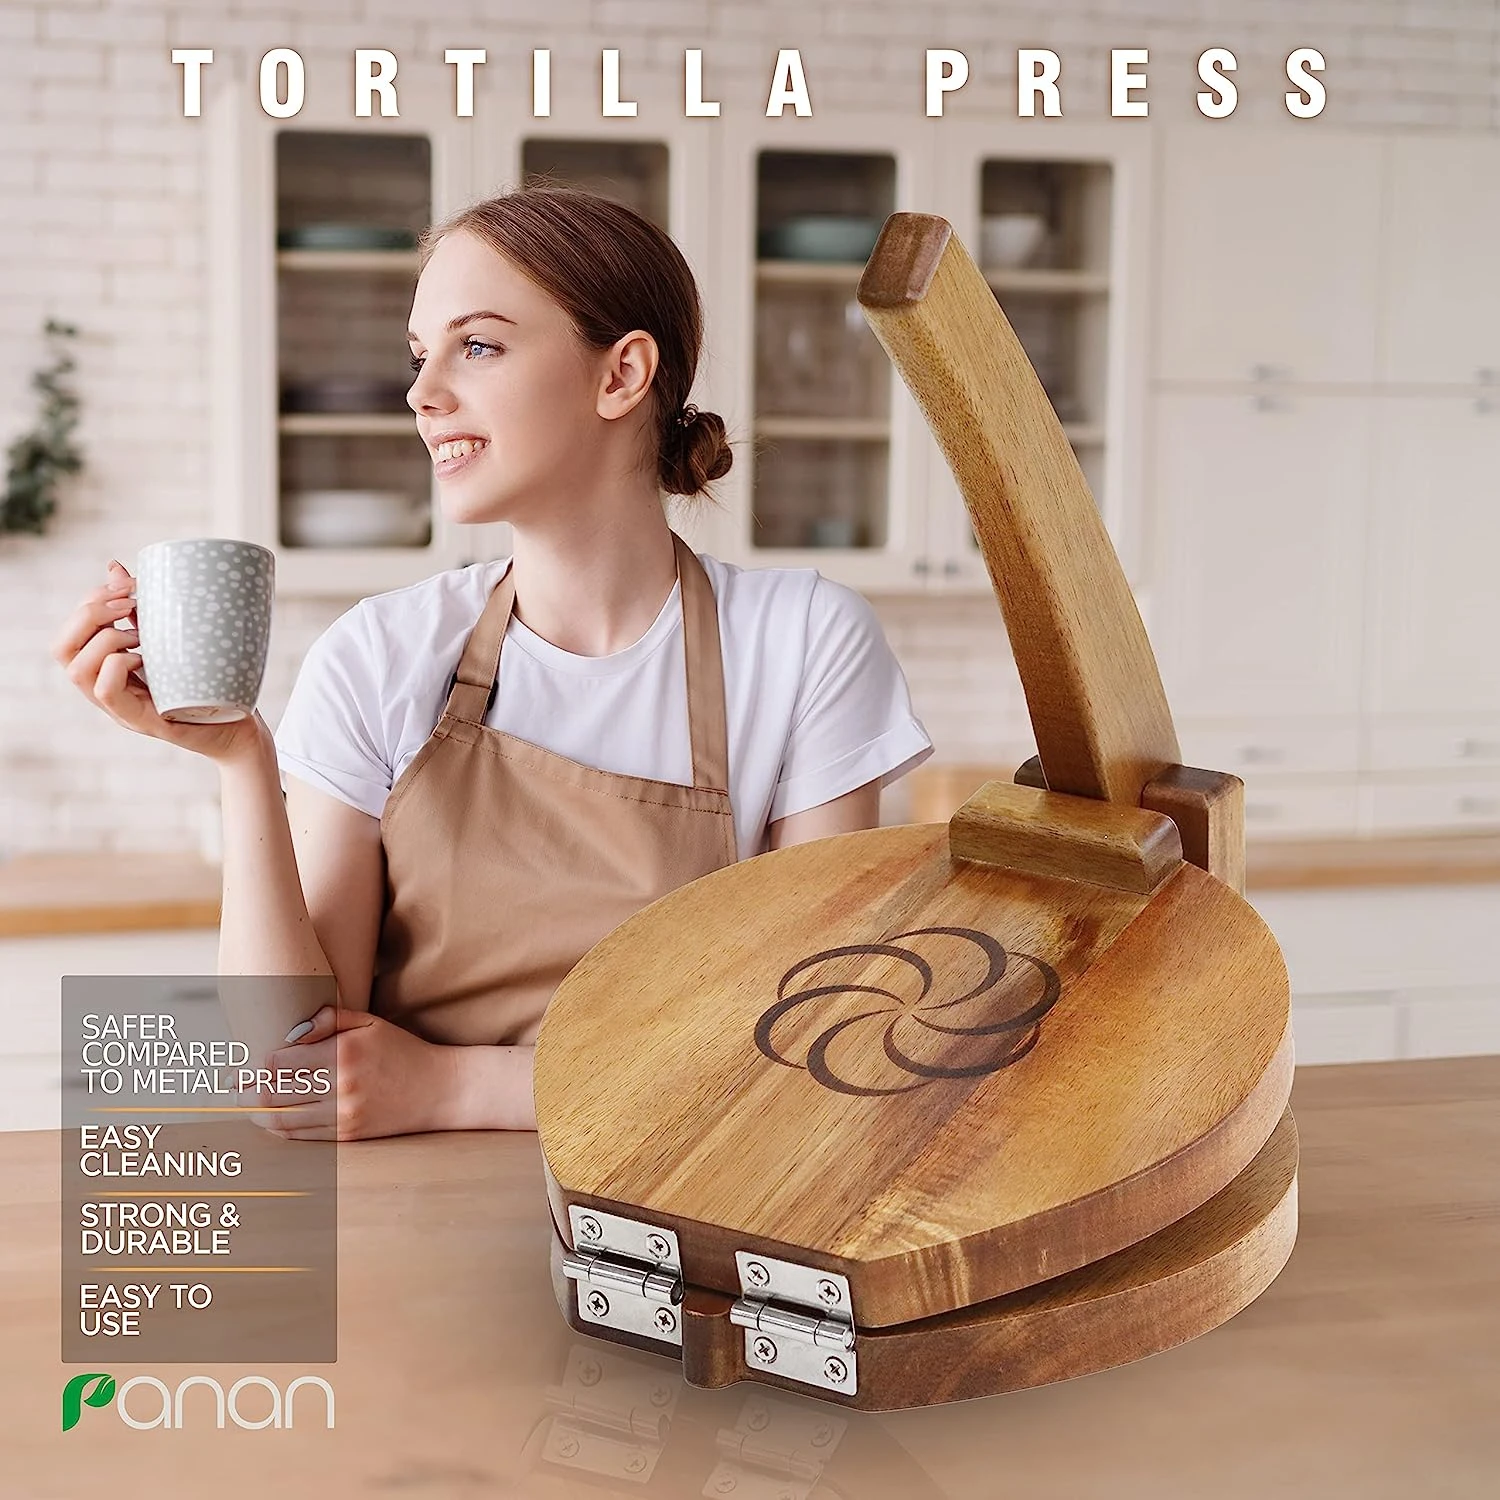 

Tortilla Press Mexican Tortillera Presser Made from Natural Food-Grade Acacia Wood - Large Wood Pataconera with 50 Pieces Parchm